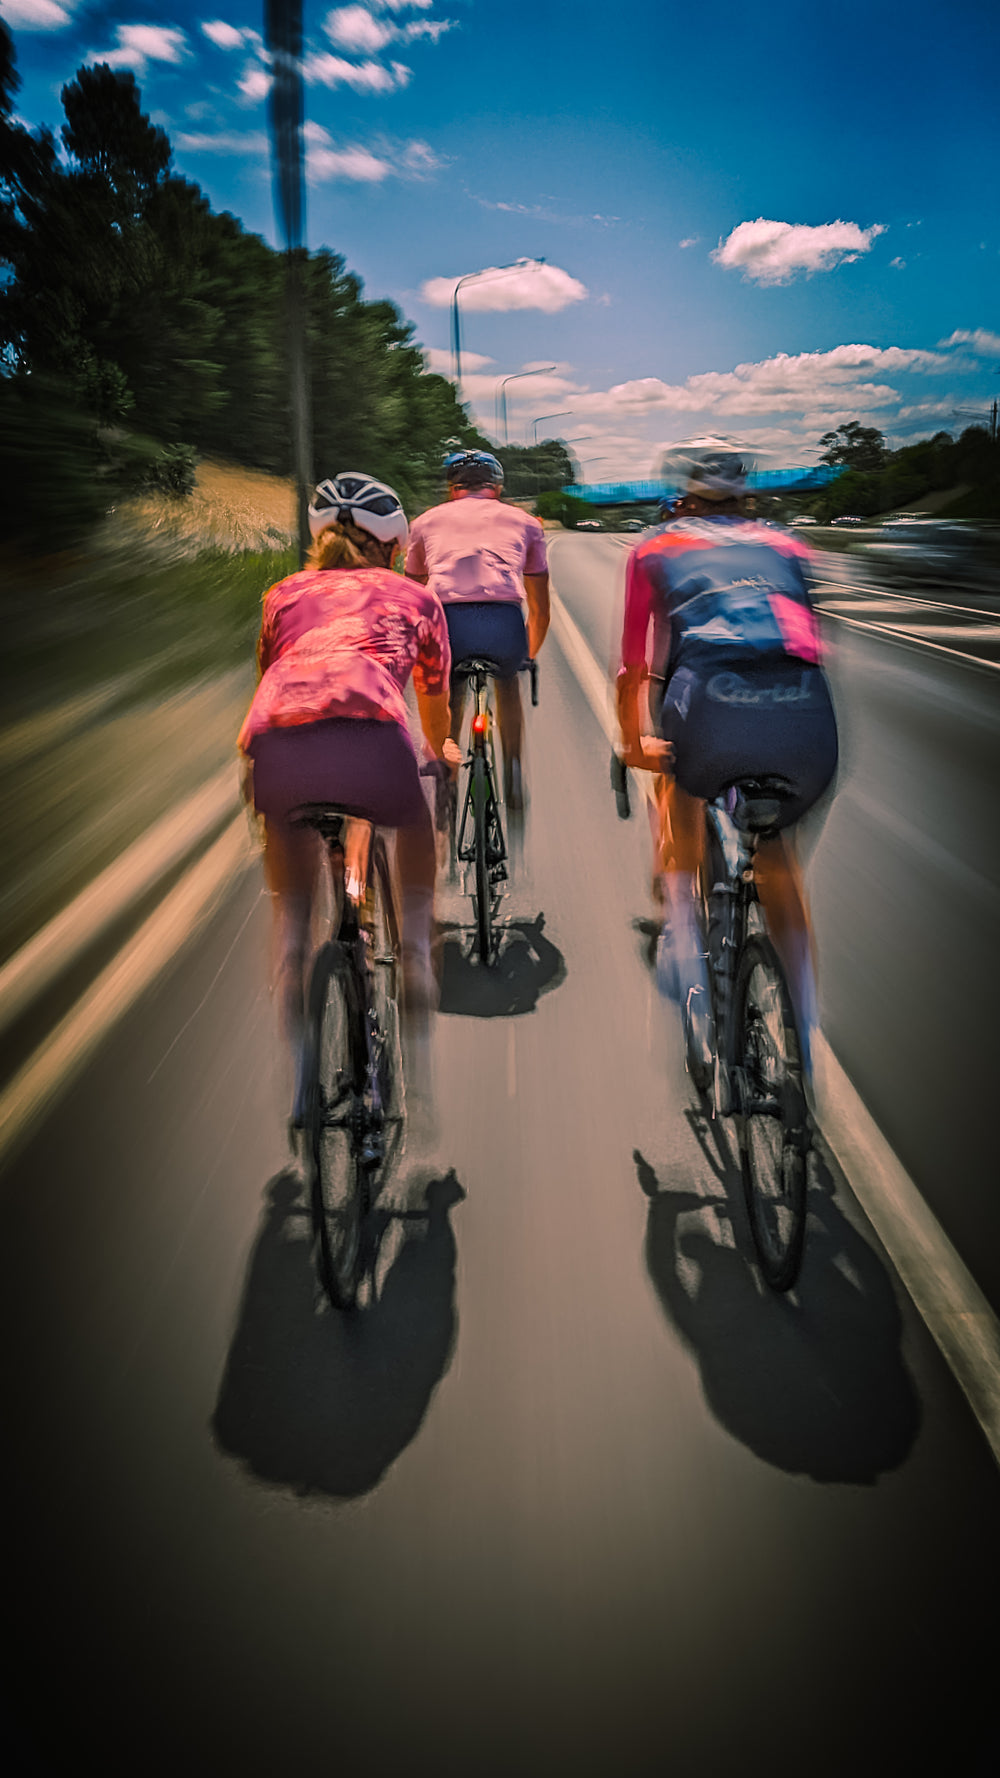 Four cyclists, both male and female, wearing sustainable, premium Aero-Fit cycling clothing ride in a group, their motion creating a blur effect in the background as they move at a high speed. The clothing is designed to improve performance and reduce environmental impact, while providing comfort and style to all genders